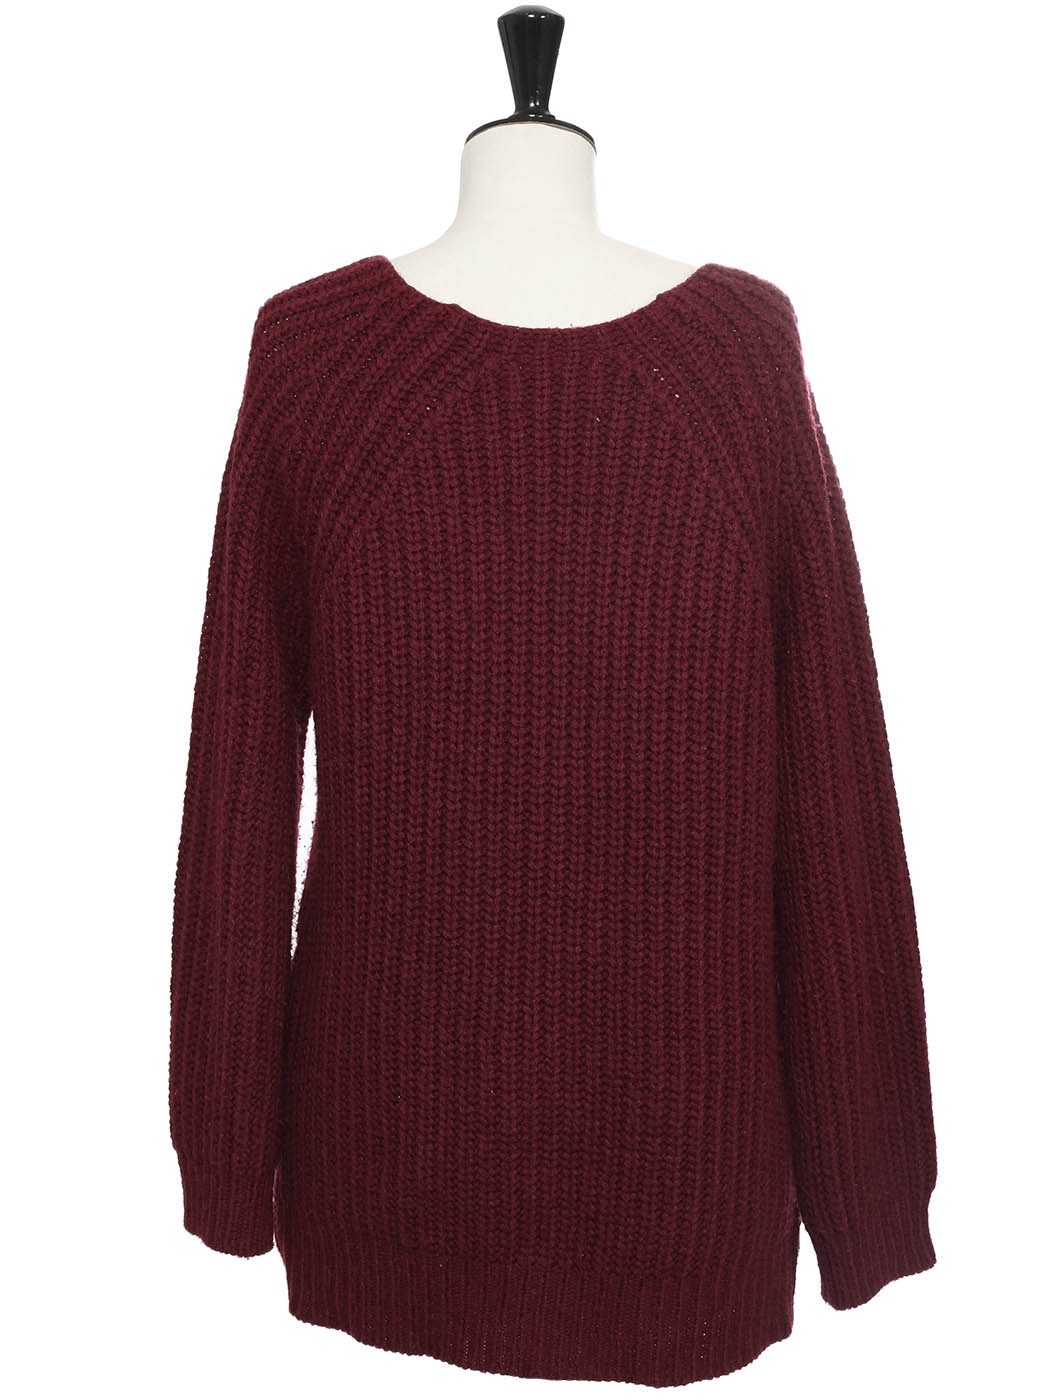 Louise Paris - ZADIG & VOLTAIRE Burgundy red heavy knit alpaga and wool ...